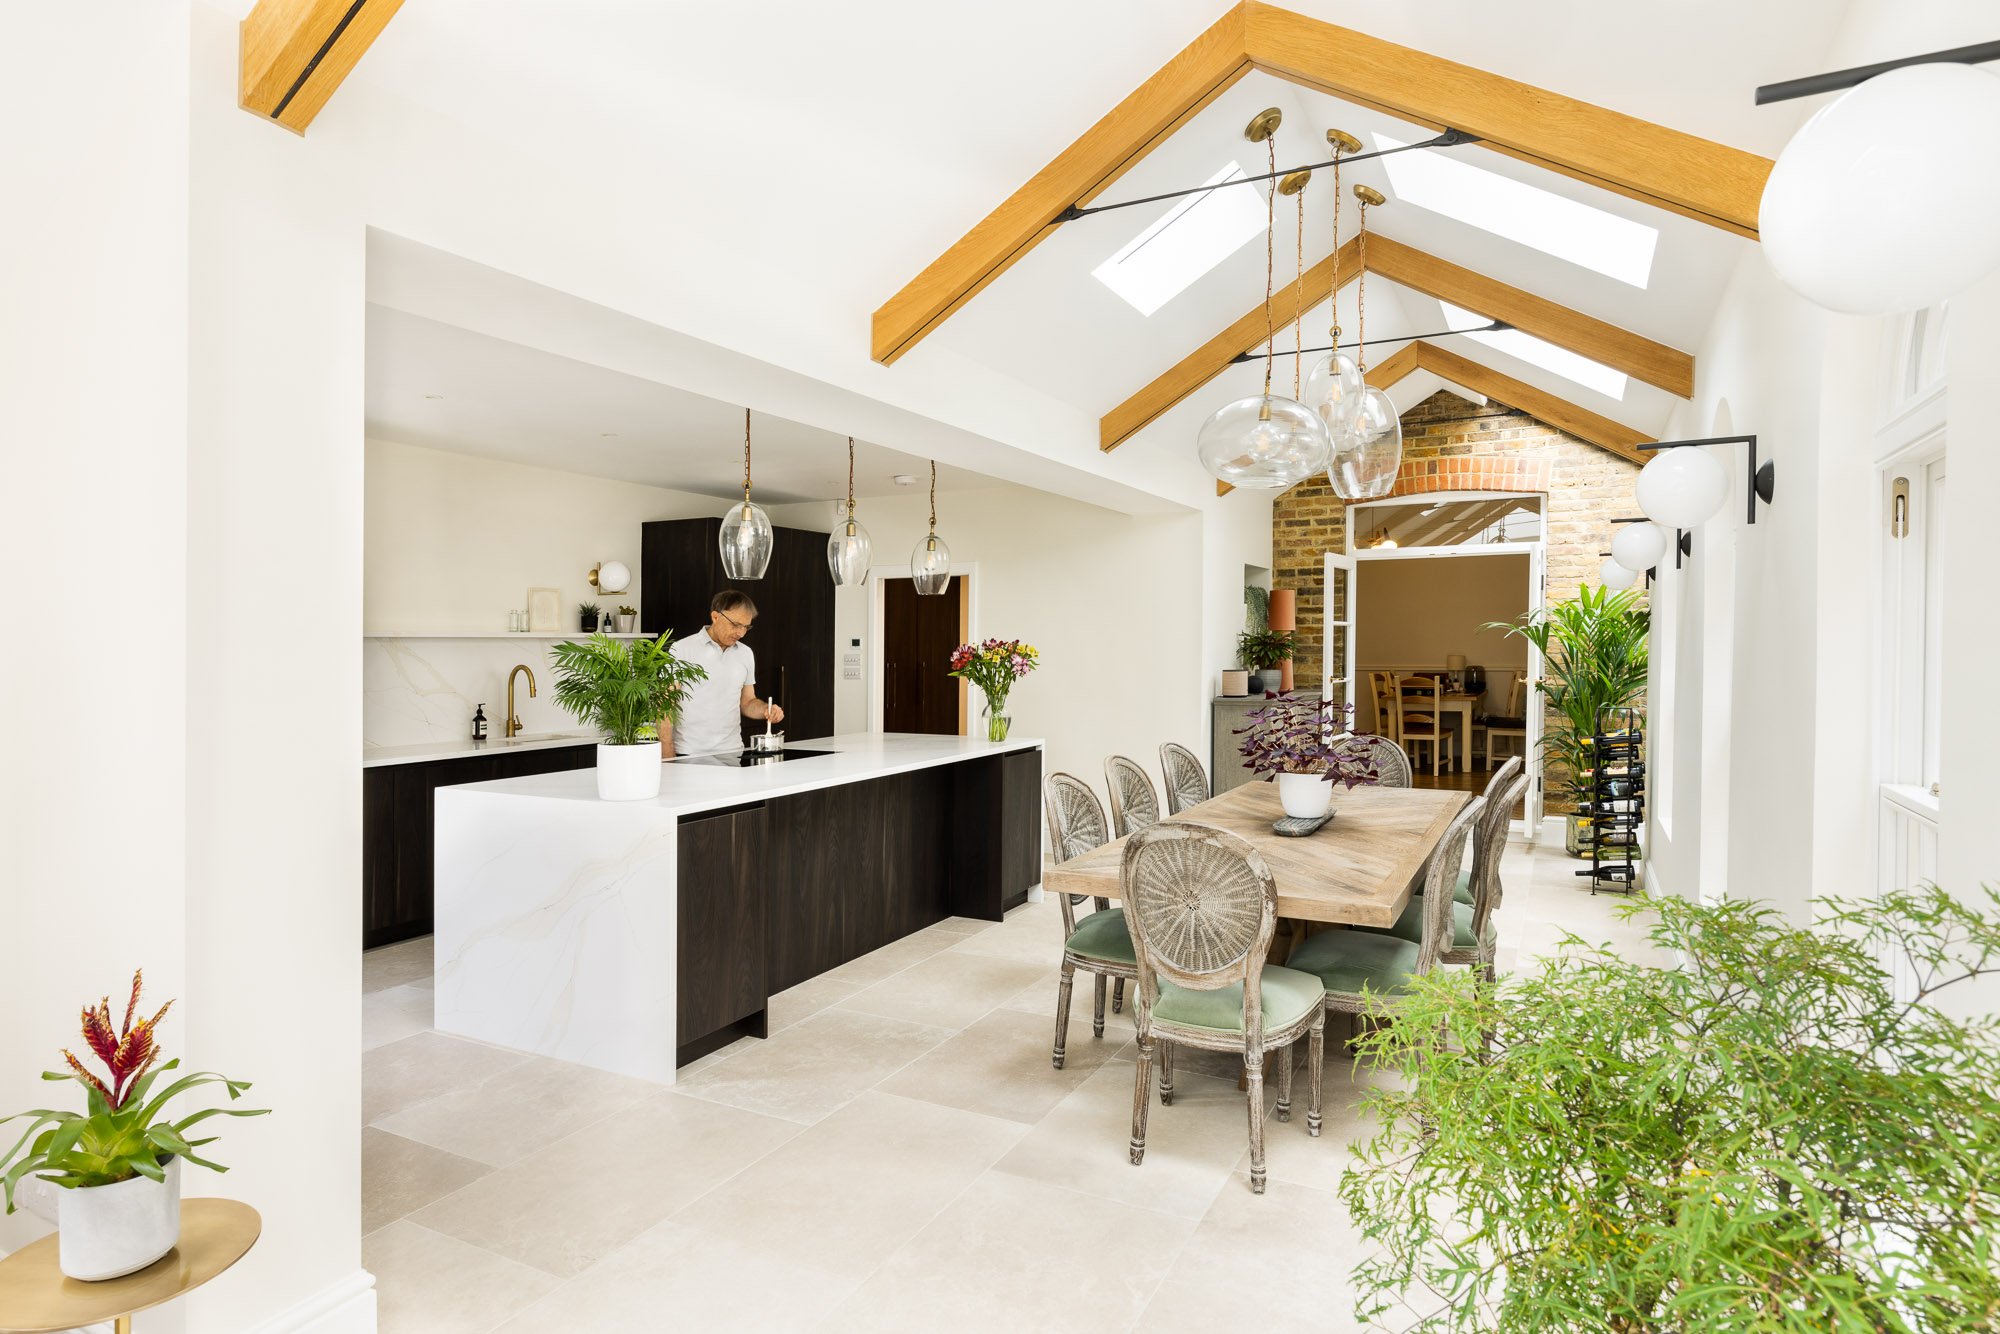 Kitchen-extension-photographed-South-London-interior-photographer.jpg